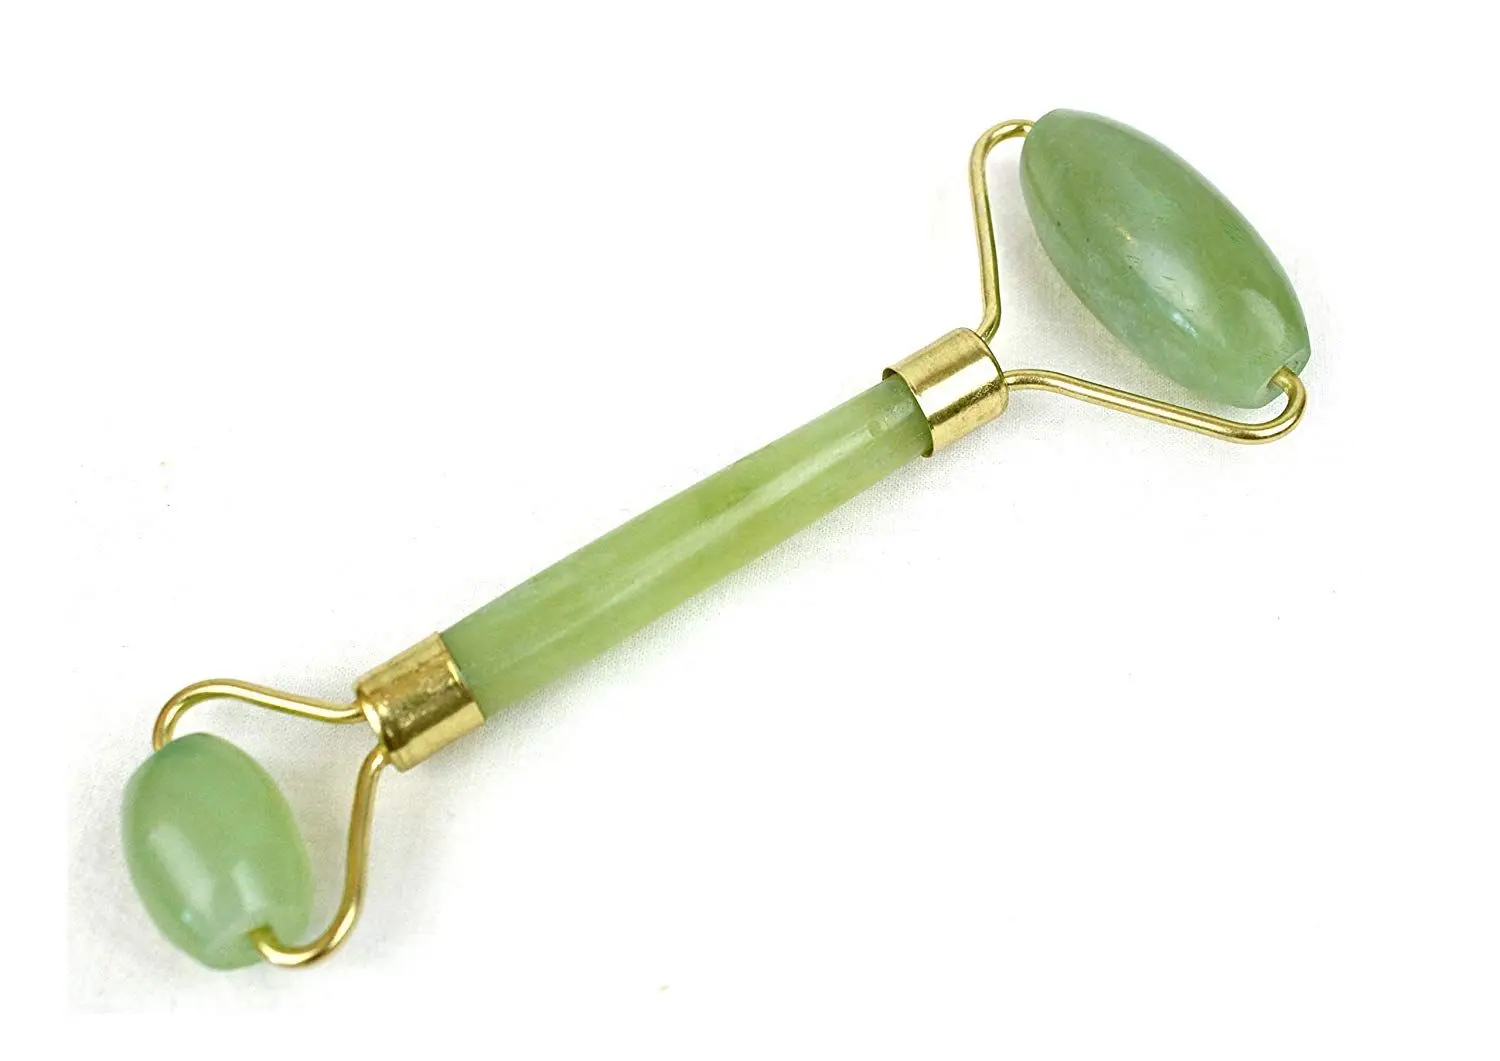 Bronson Professional Jade Roller Massager/Slimming Tool For Face, Neck And Head (Green)